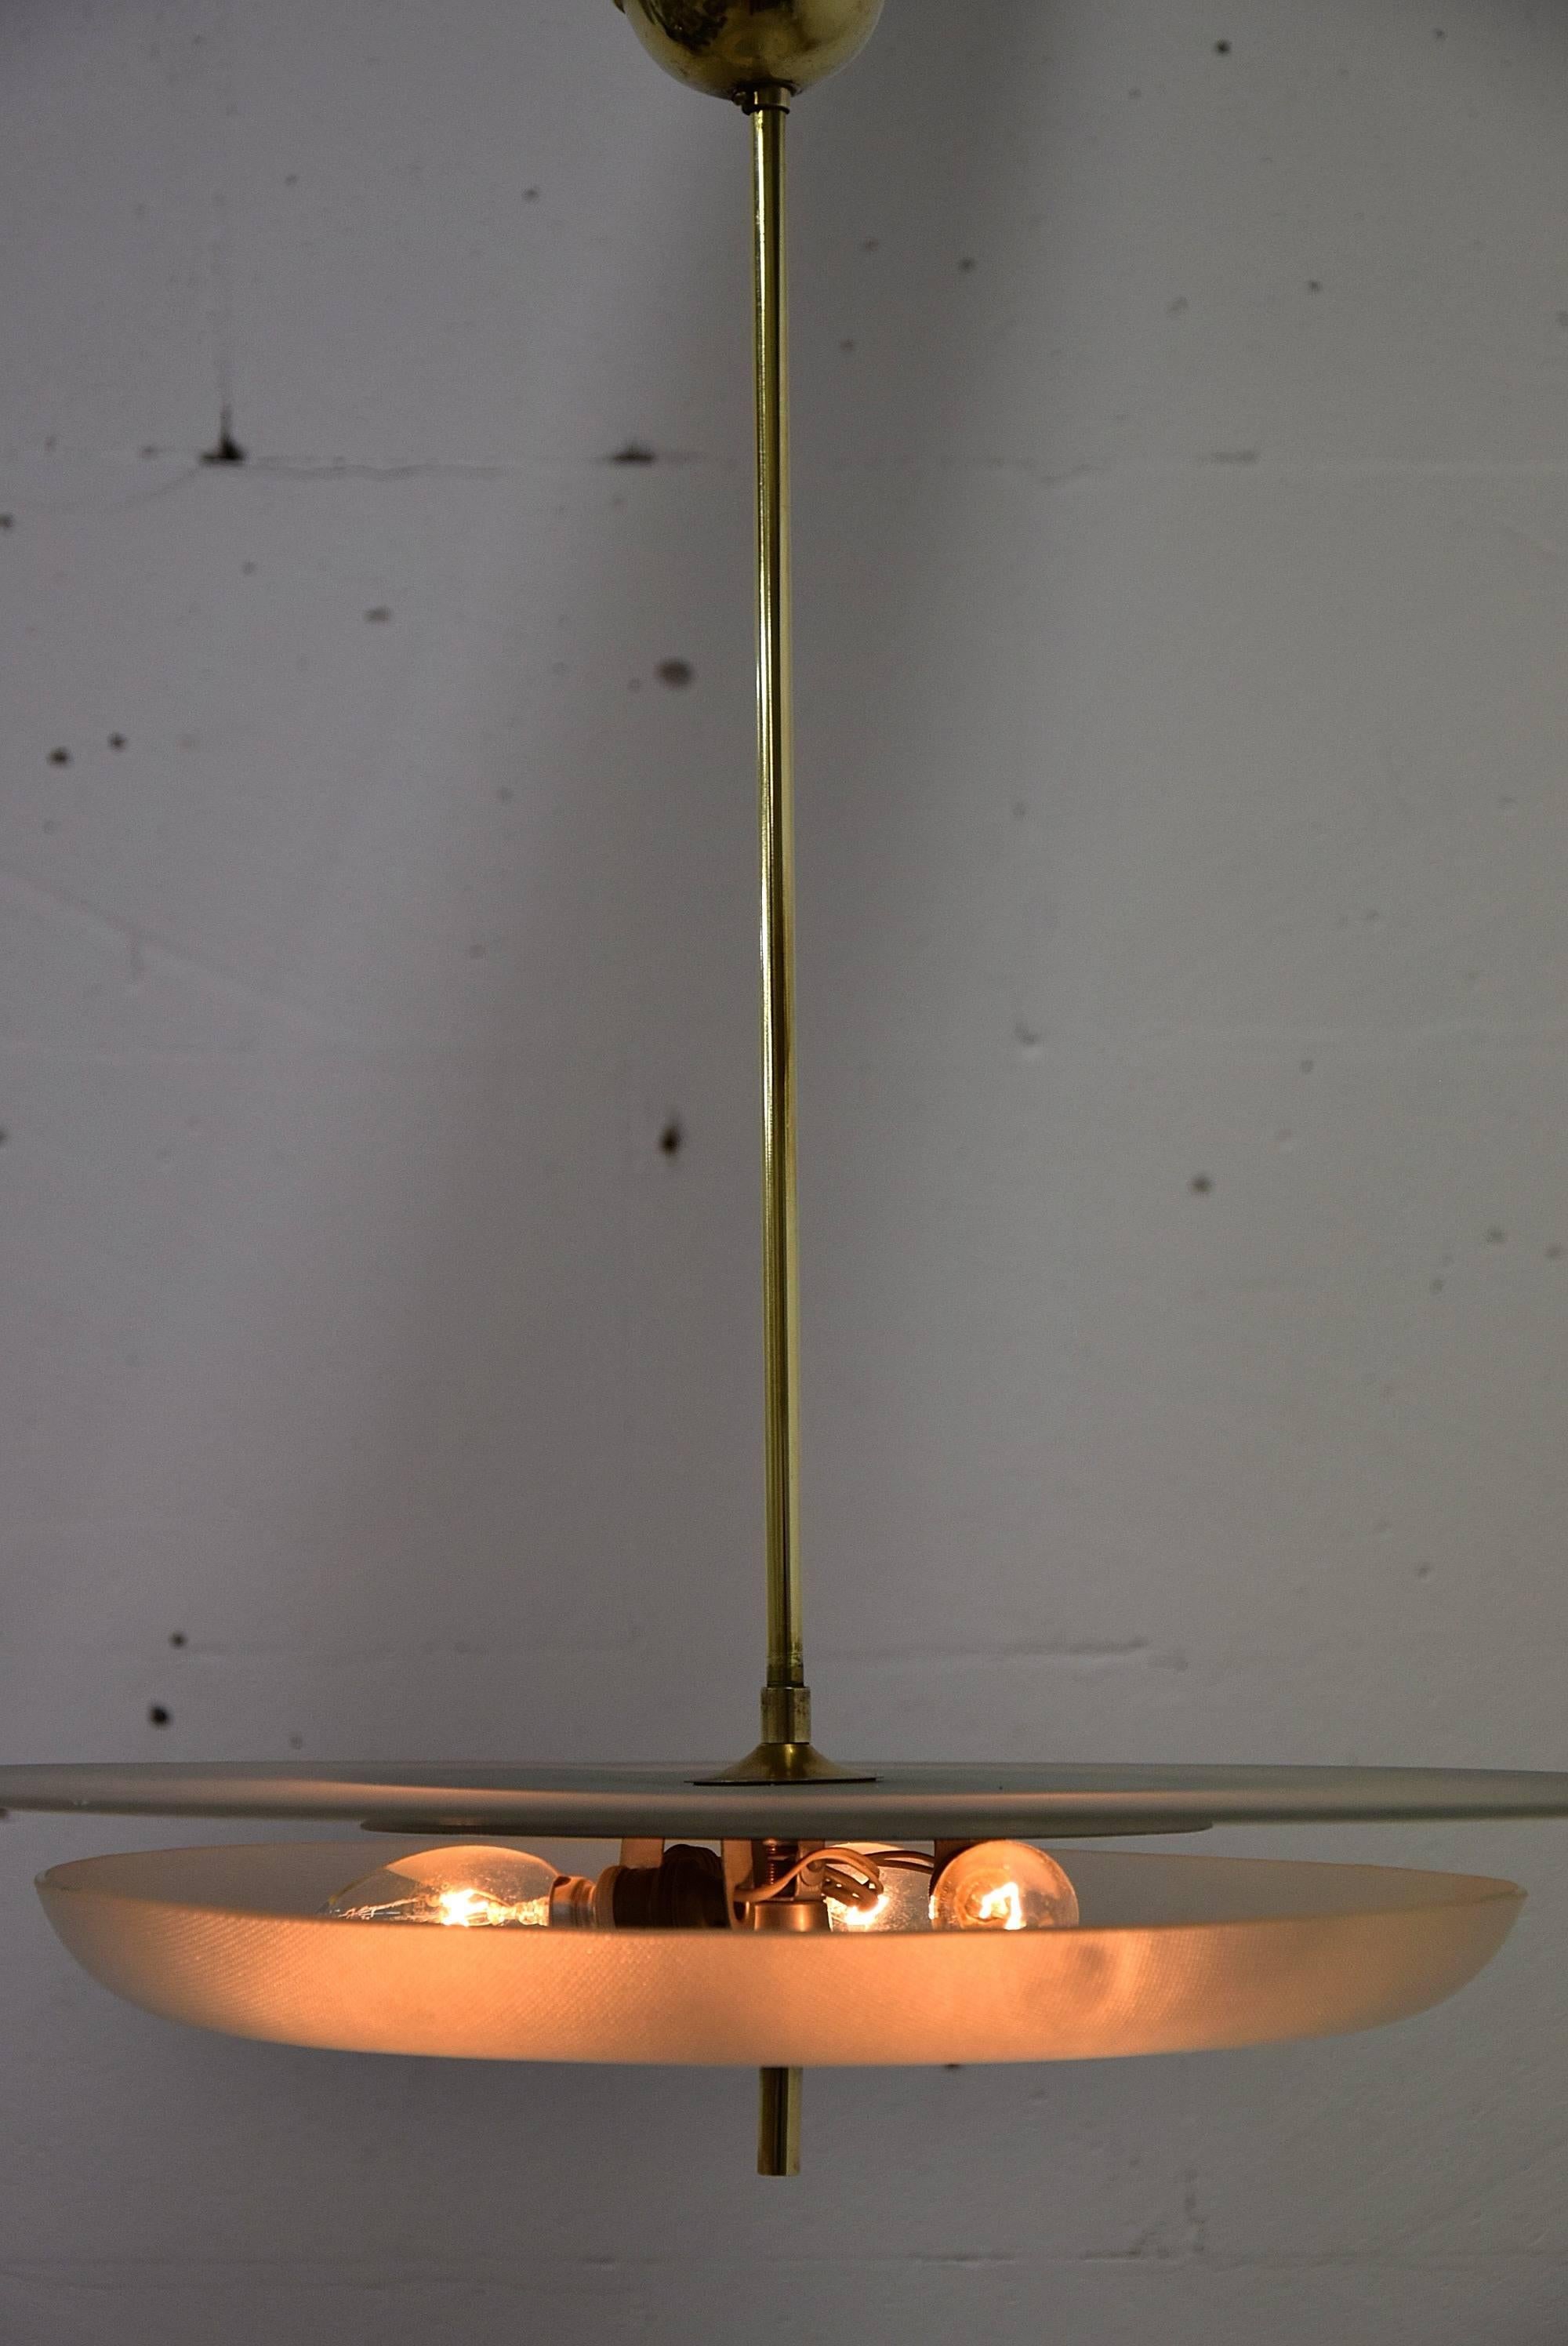 Chandelier Mid-Century Modern Fontana Arte attributed.
Beautiful and sophisticated 1940s ceiling lamp attributed to Pietra Chiesa for Fontana Arte

The lamp holds three lightbulbs and is in fantastic condition.

Measurements: H 62 x D 48